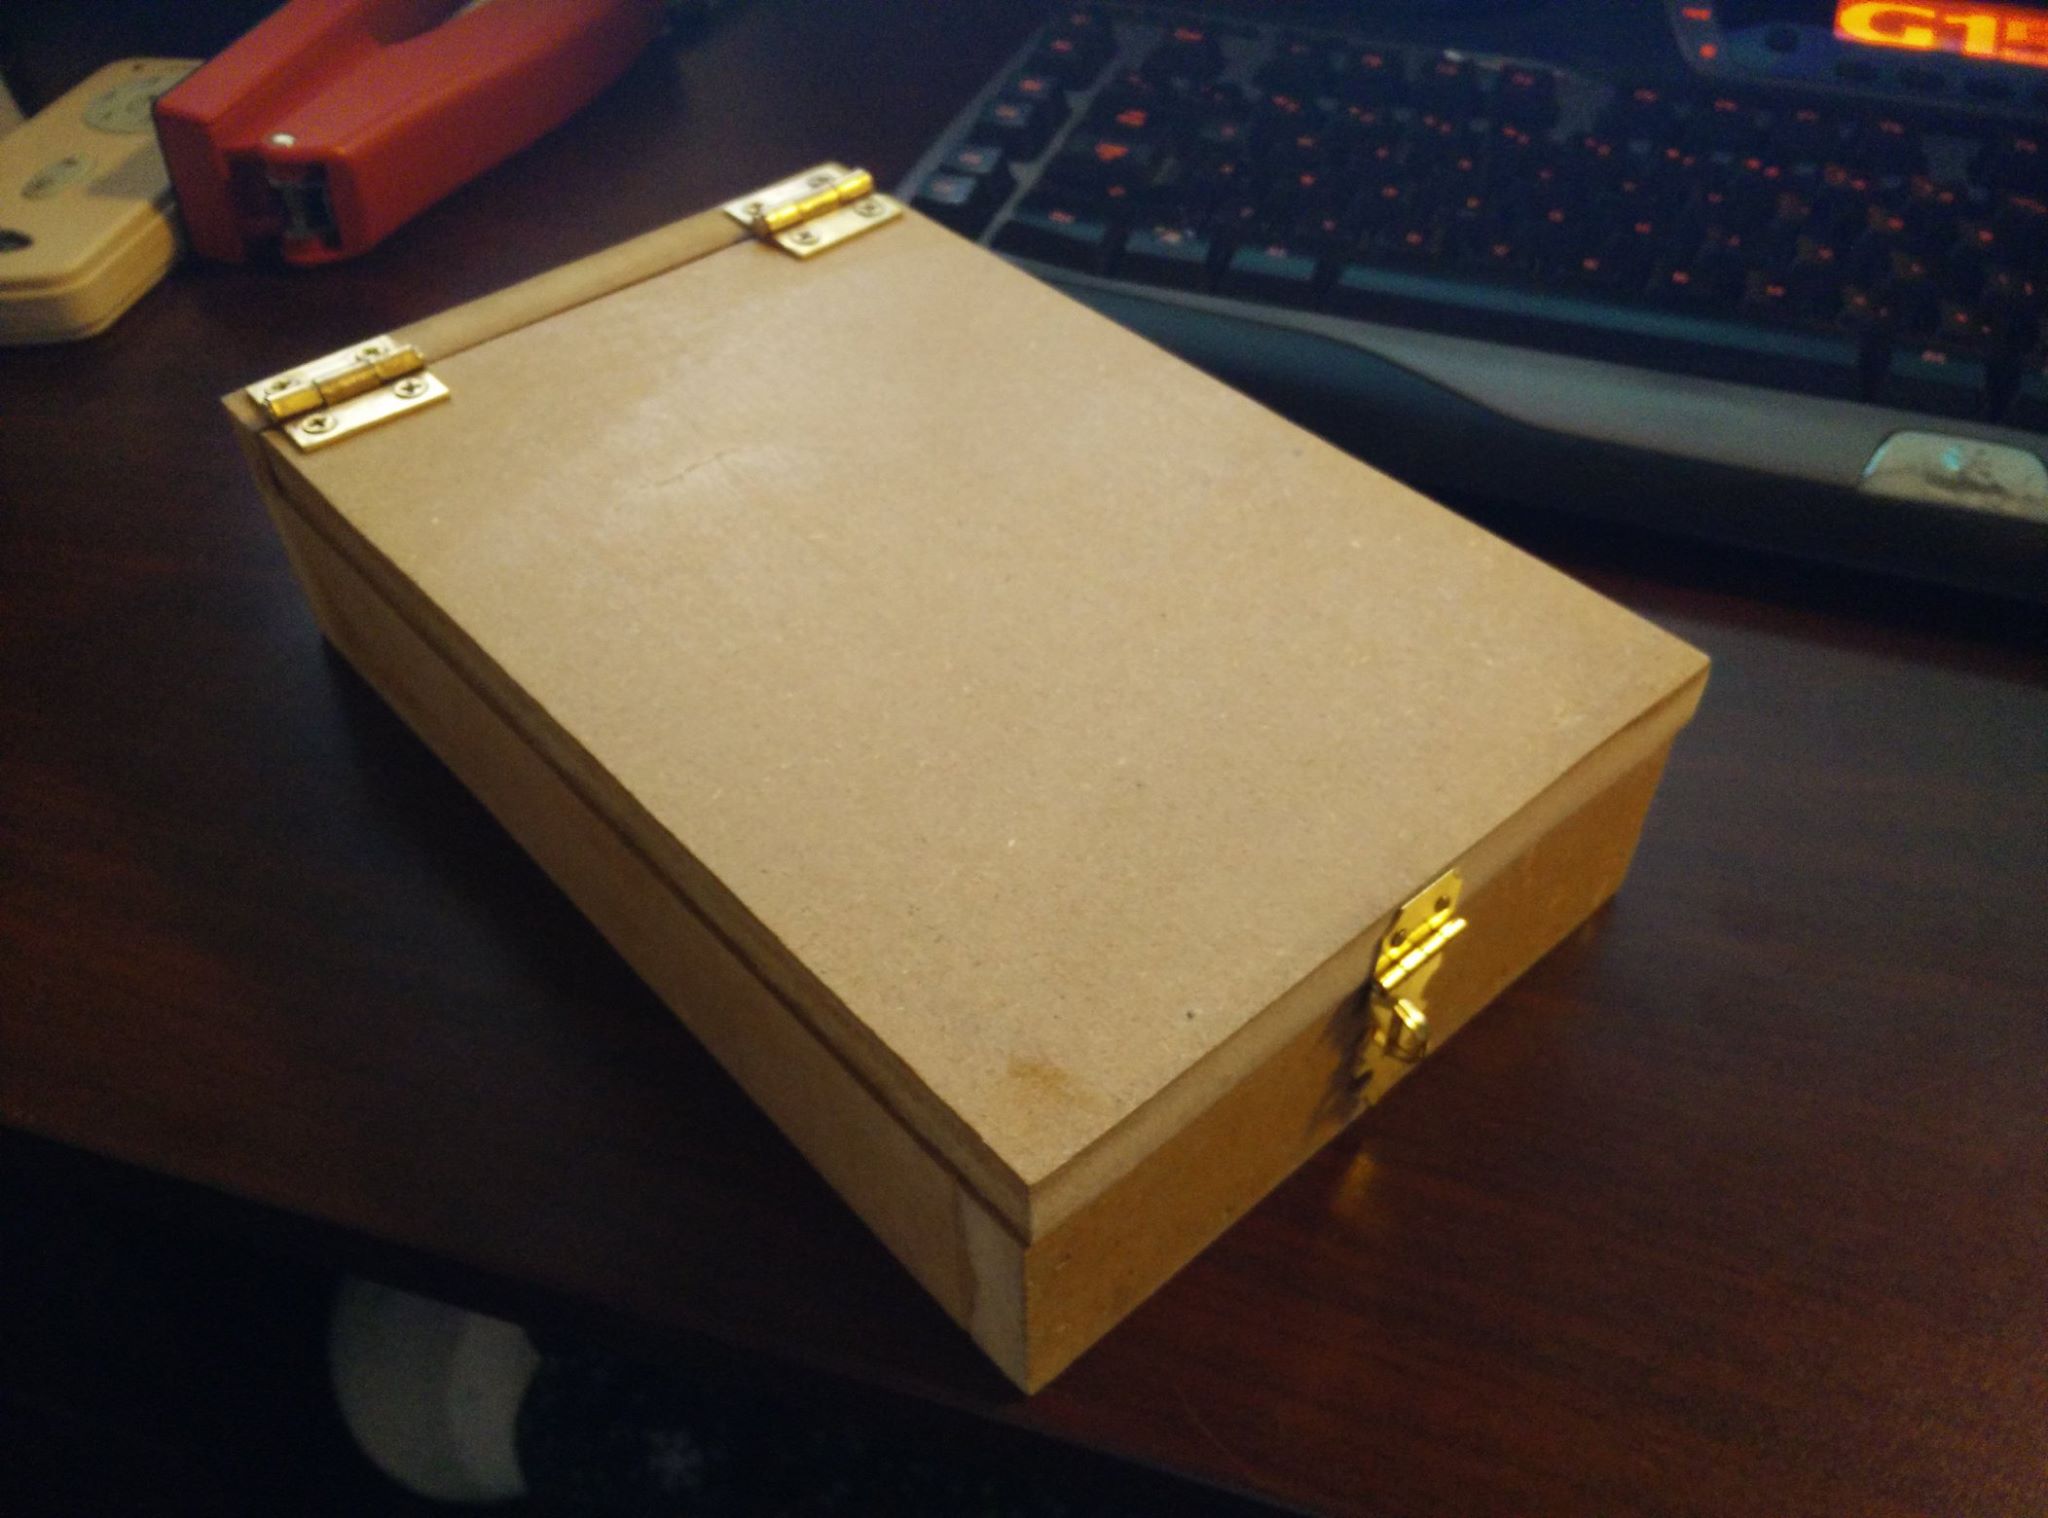 So I made a quick cheap lock box out...